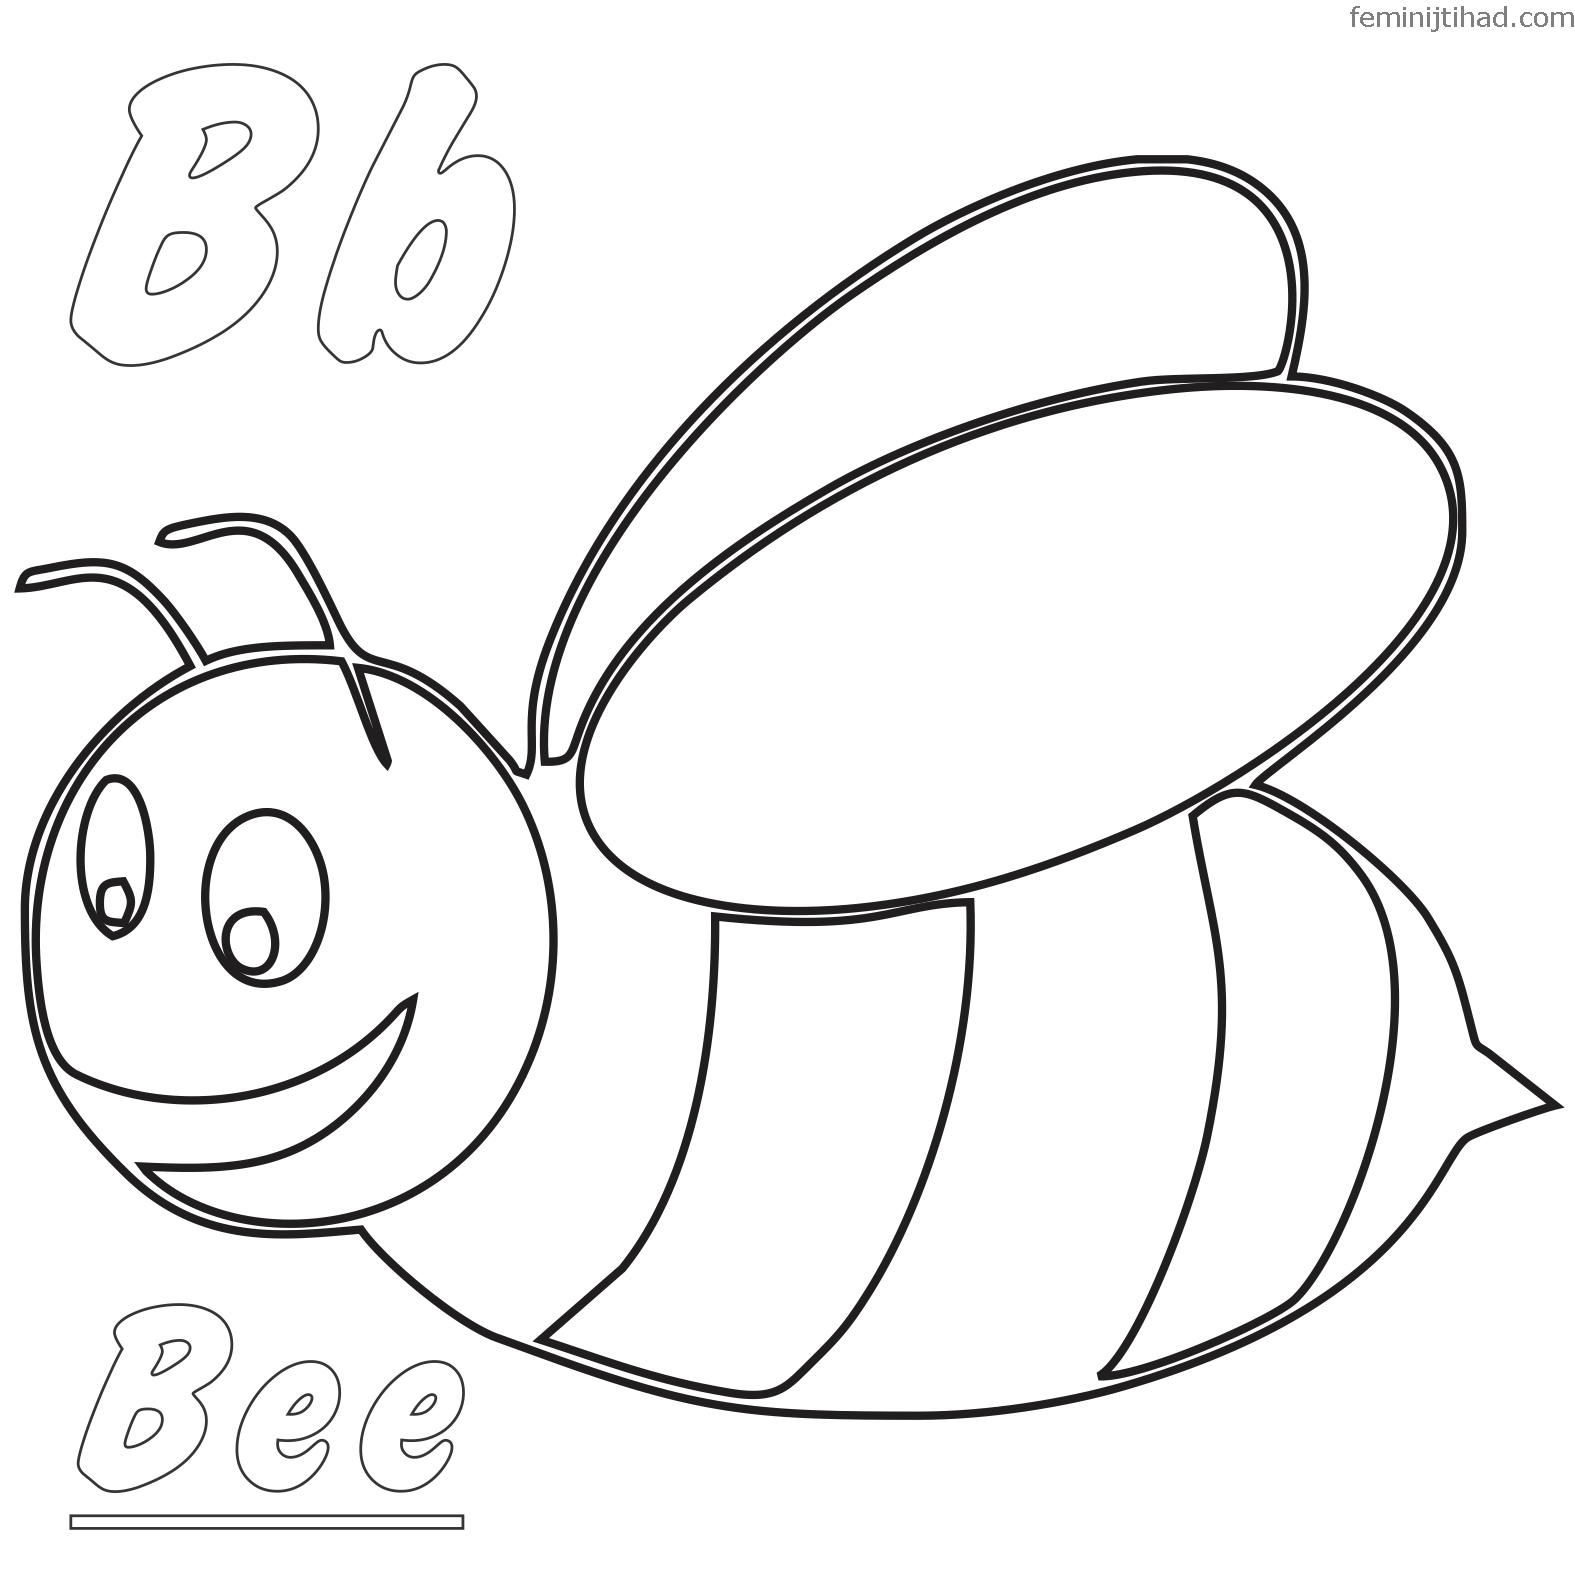 Bumblebee transformer coloring pages pdf free